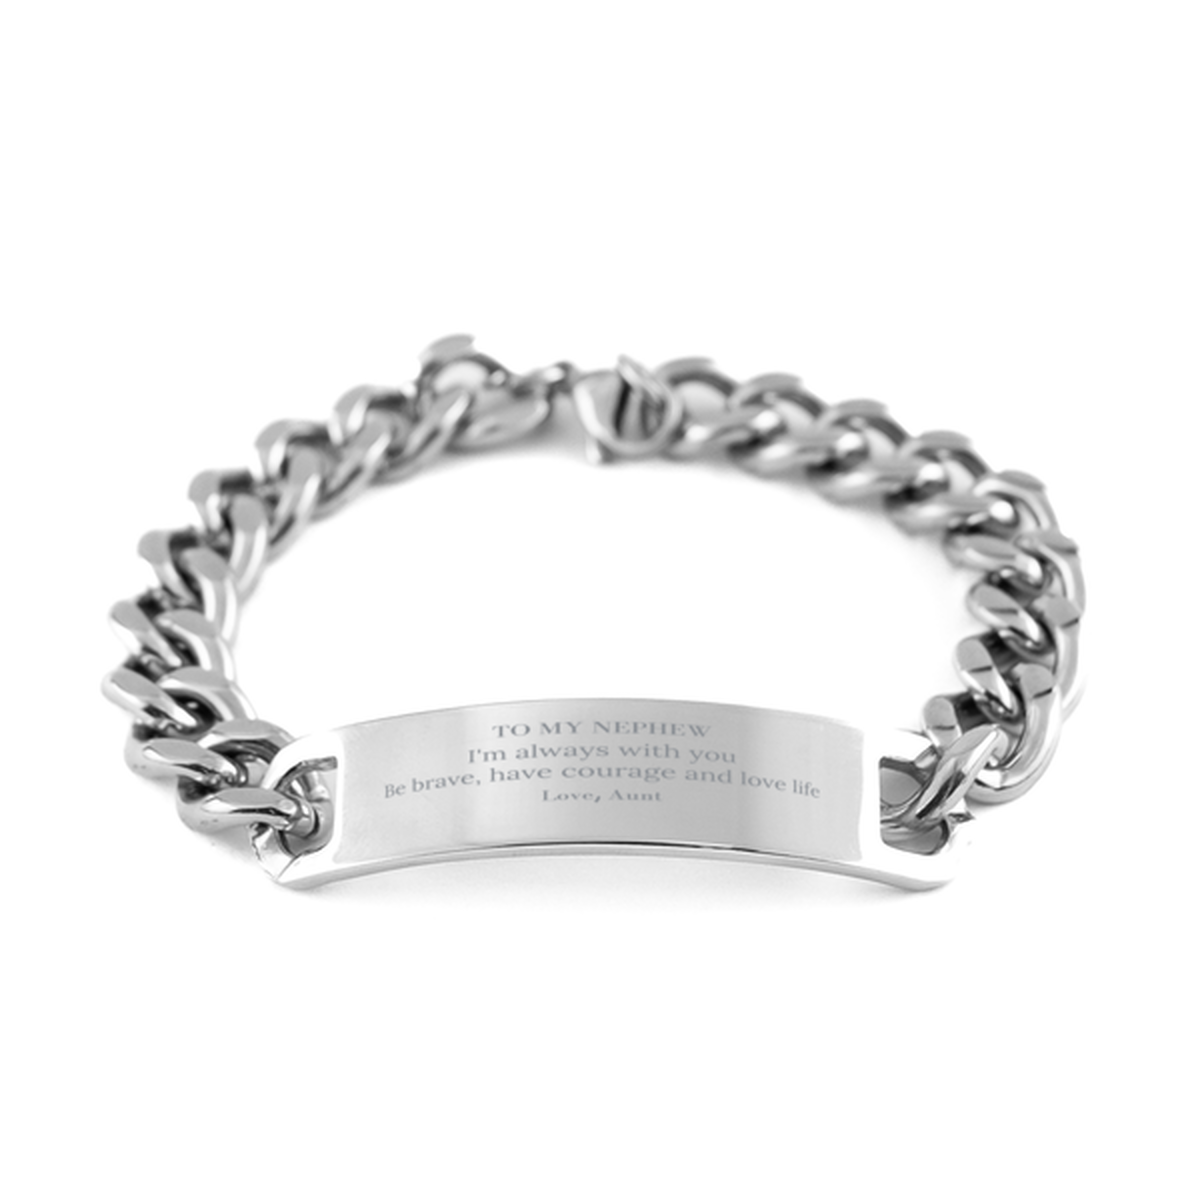 To My Nephew Gifts from Aunt, Unique Cuban Chain Stainless Steel Bracelet Inspirational Christmas Birthday Graduation Gifts for Nephew I'm always with you. Be brave, have courage and love life. Love, Aunt